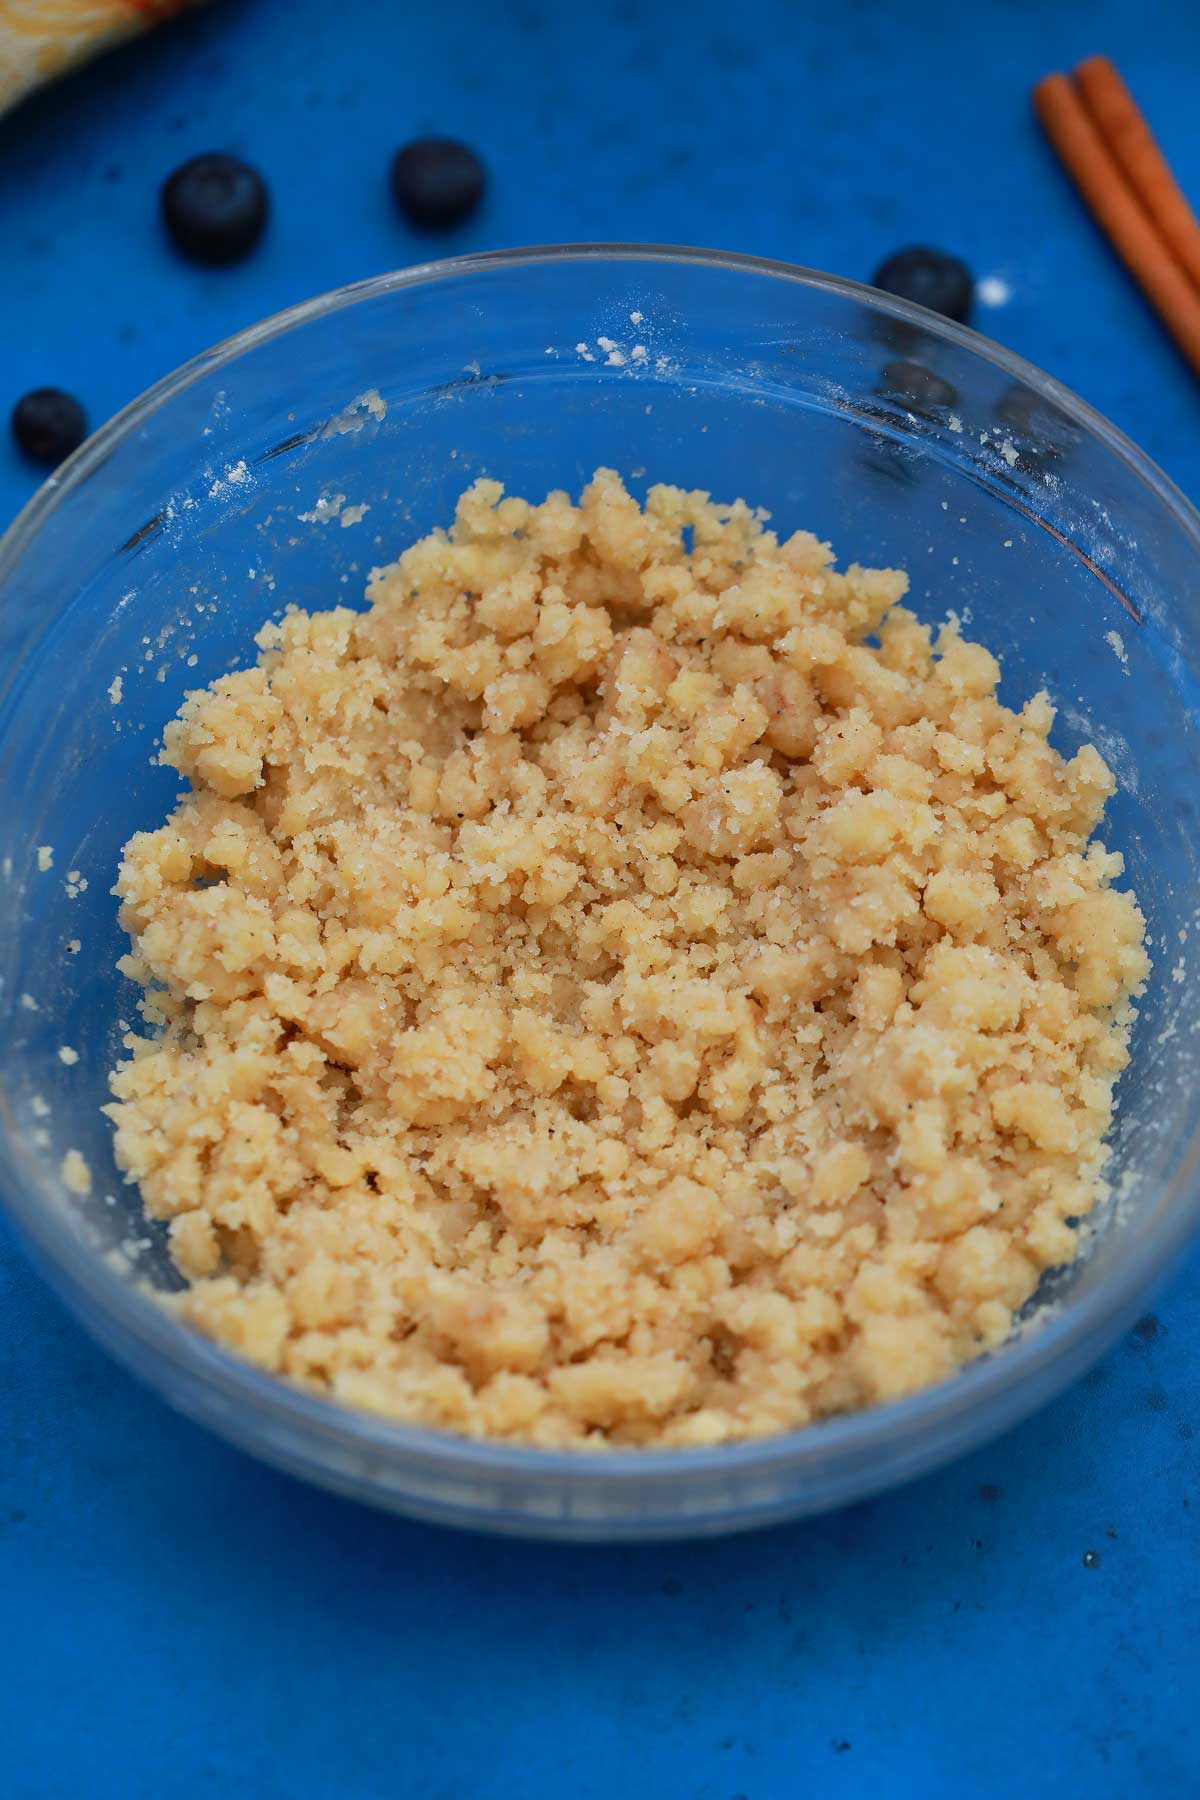 Crumb topping for muffins